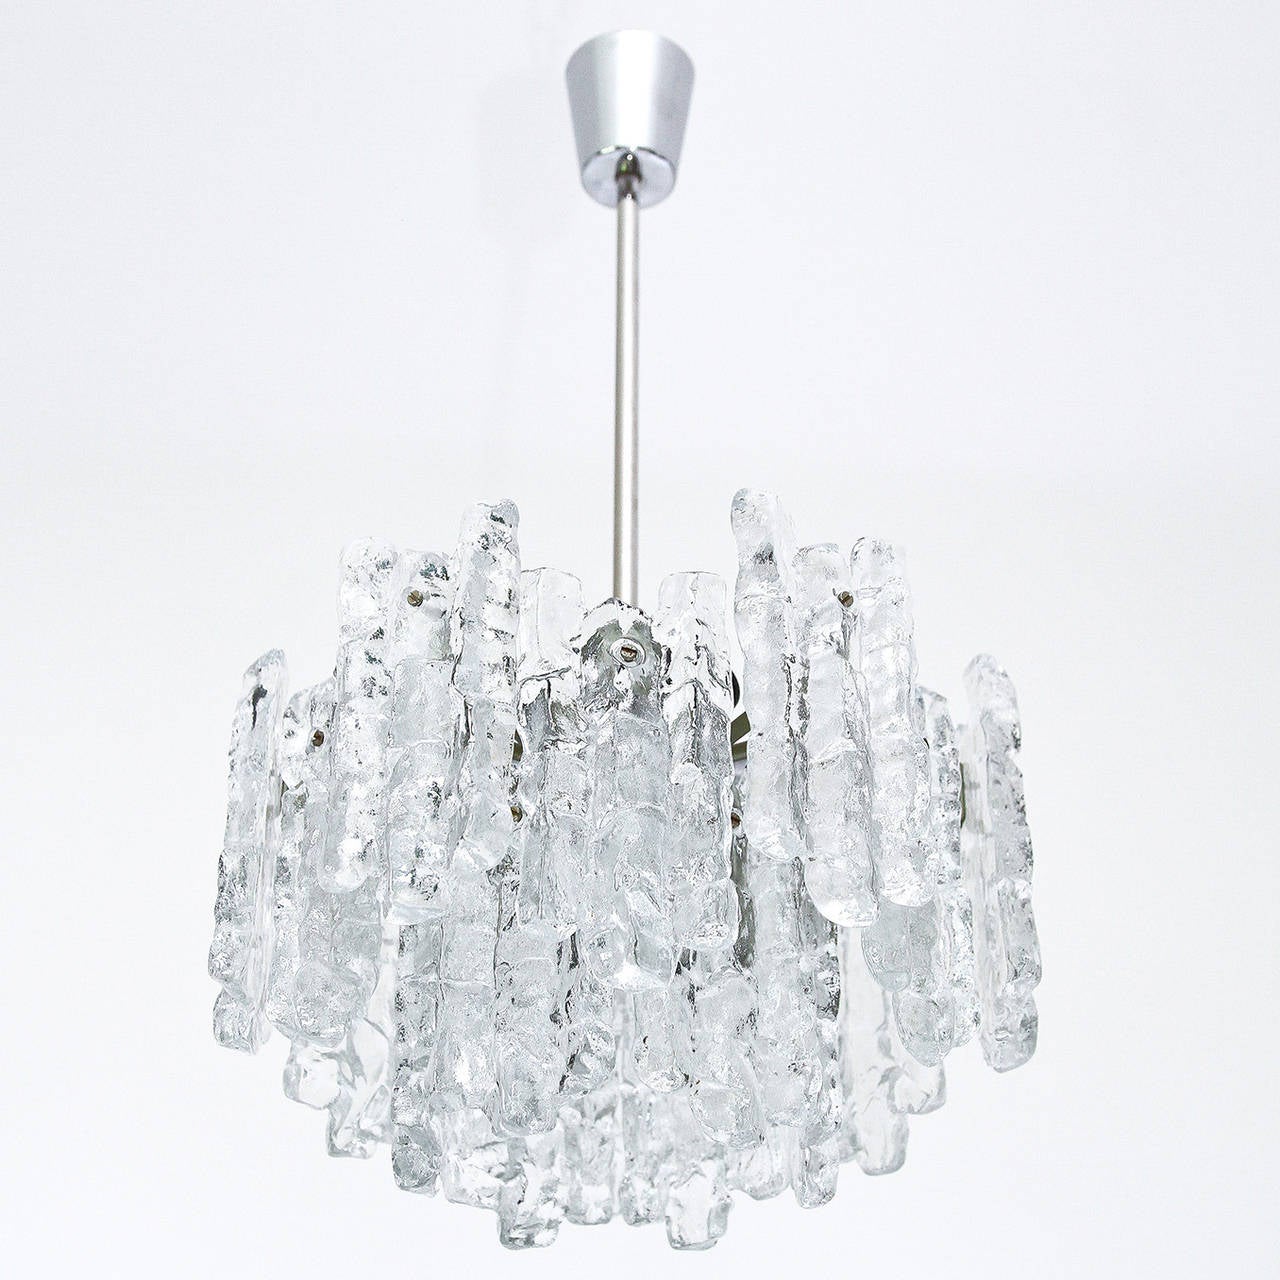 A beautiful ice glass light fixtures by Kalmar, Austria, manufactured in midcentury, circa 1970 (late 1960s or early 1970s). The chandelier is made of 18 massive ice blocks which are mounted on a silver painted metal frame.
The fixture takes six